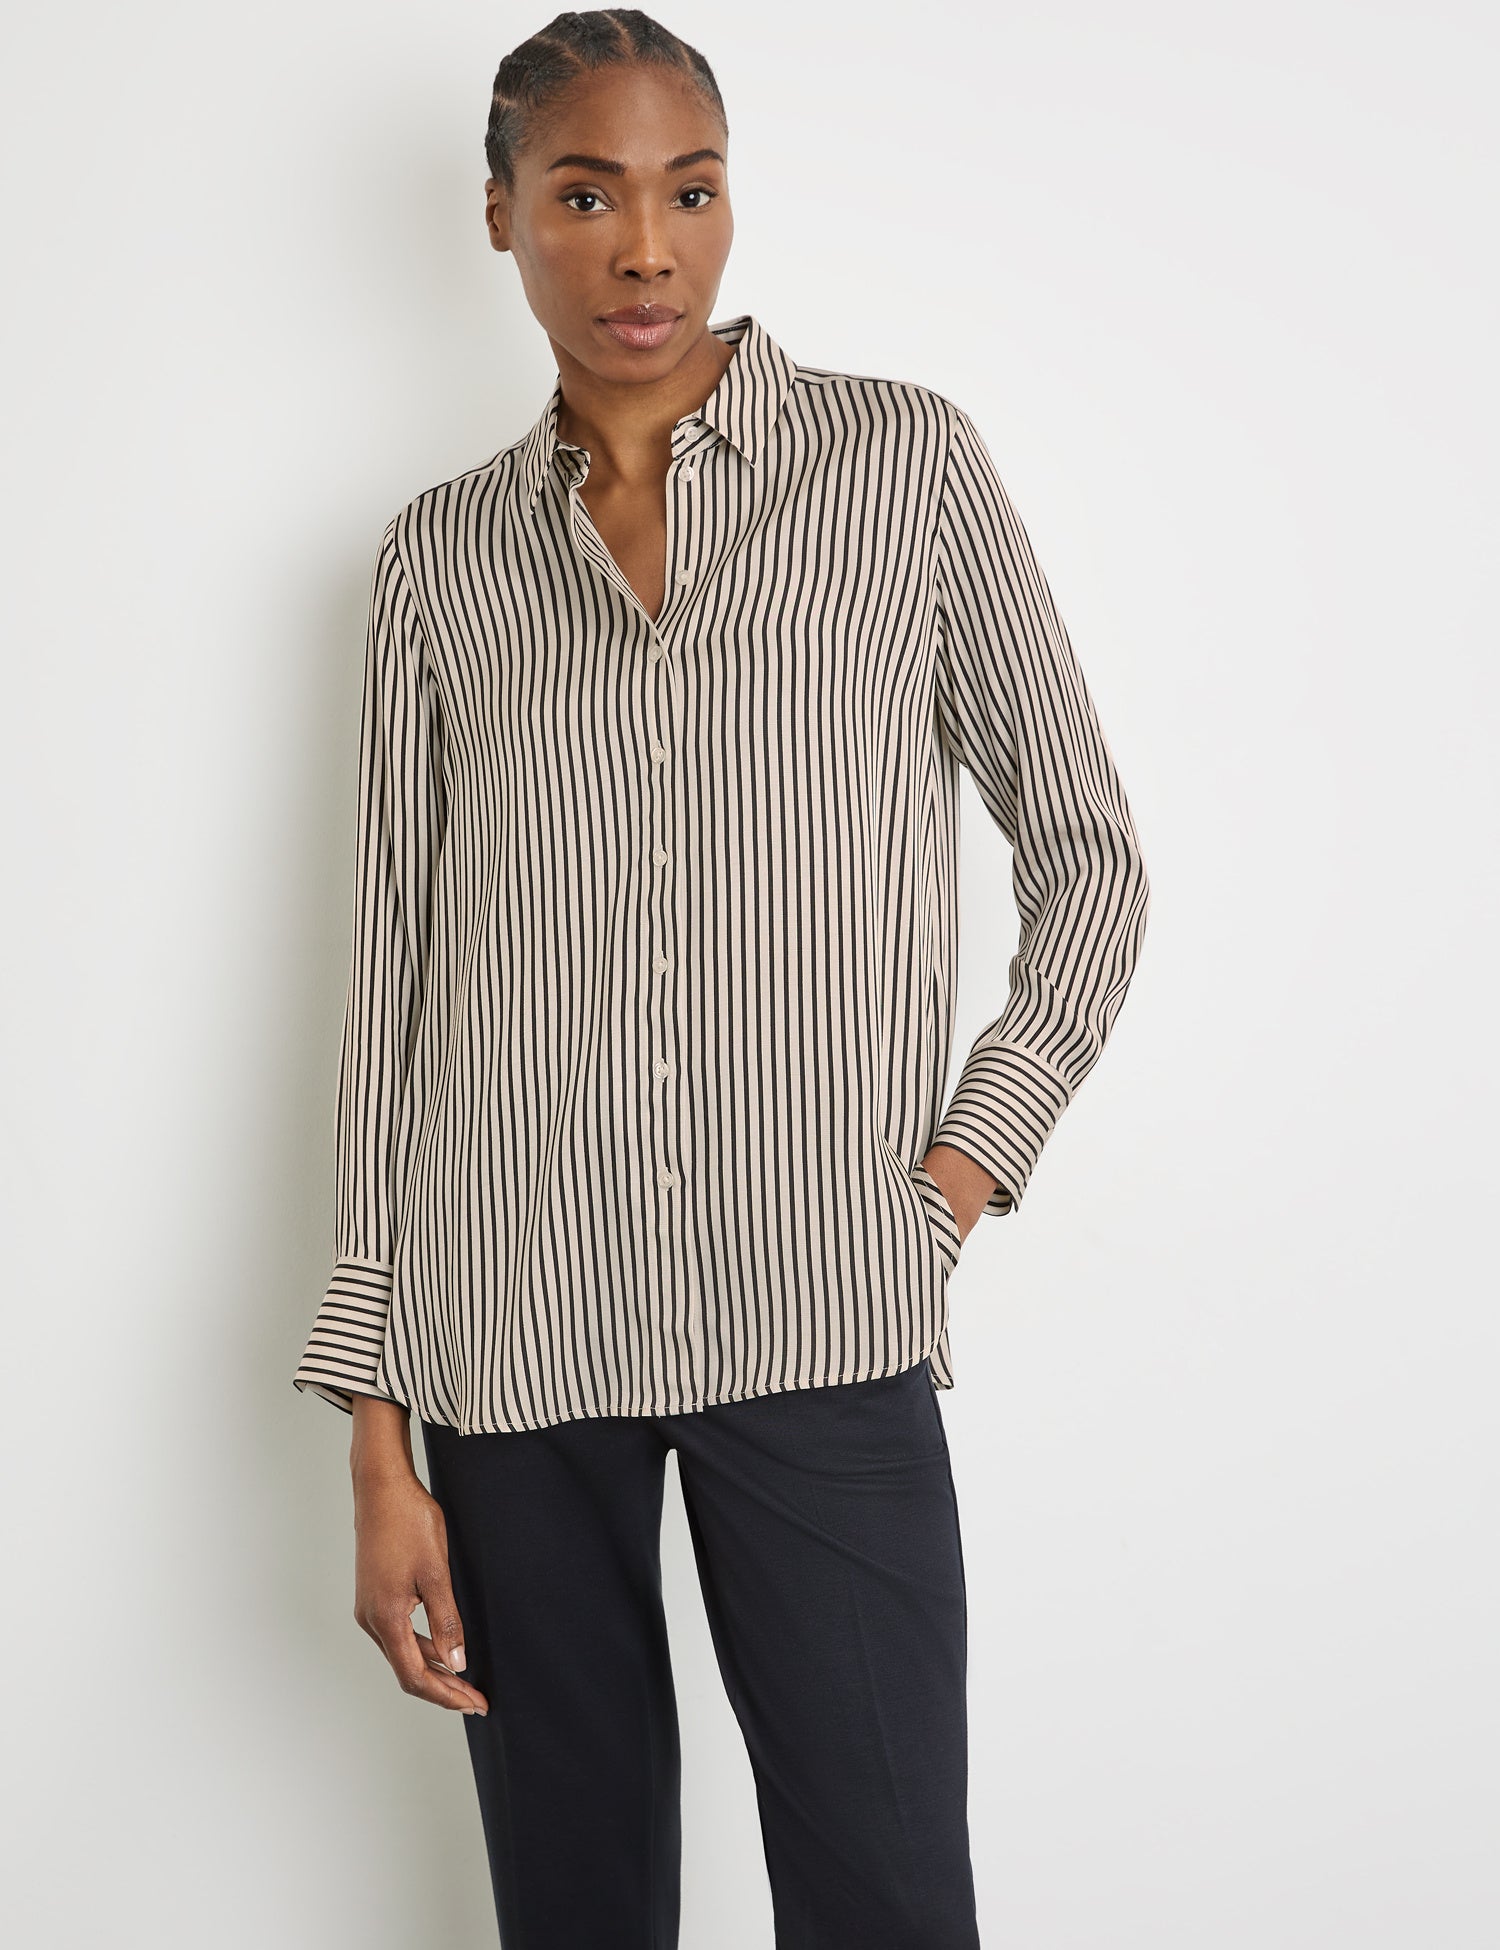 Gerry Weber Striped shirt blouse with a rounded hem